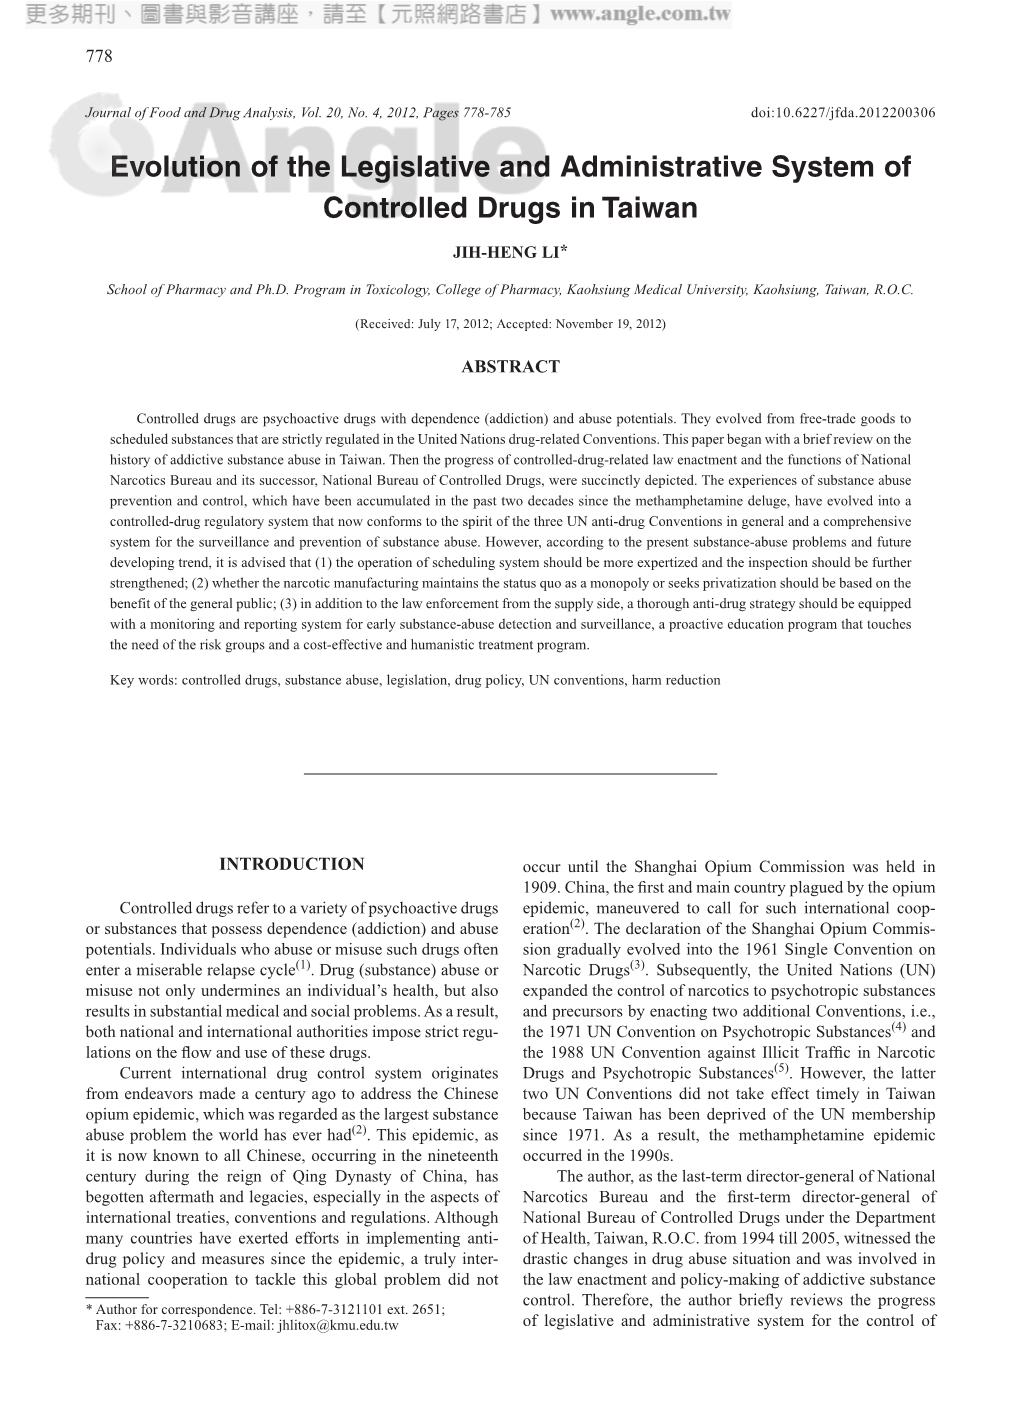 Evolution of the Legislative and Administrative System of Controlled Drugs in Taiwan